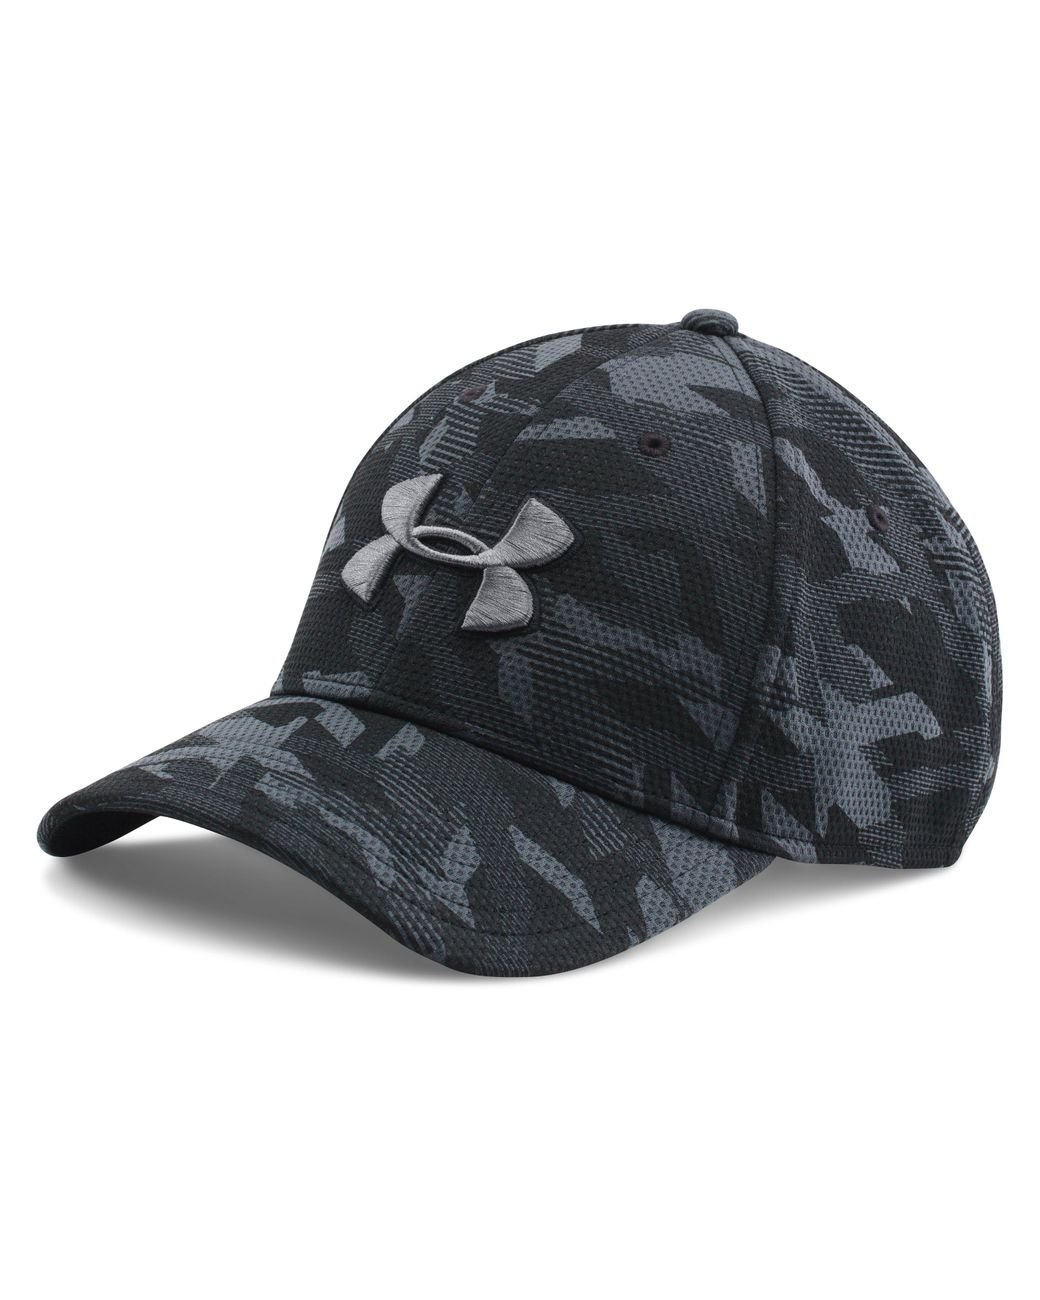 Under Armour Freedom Blitzing Hat, Men's Pitch Gray